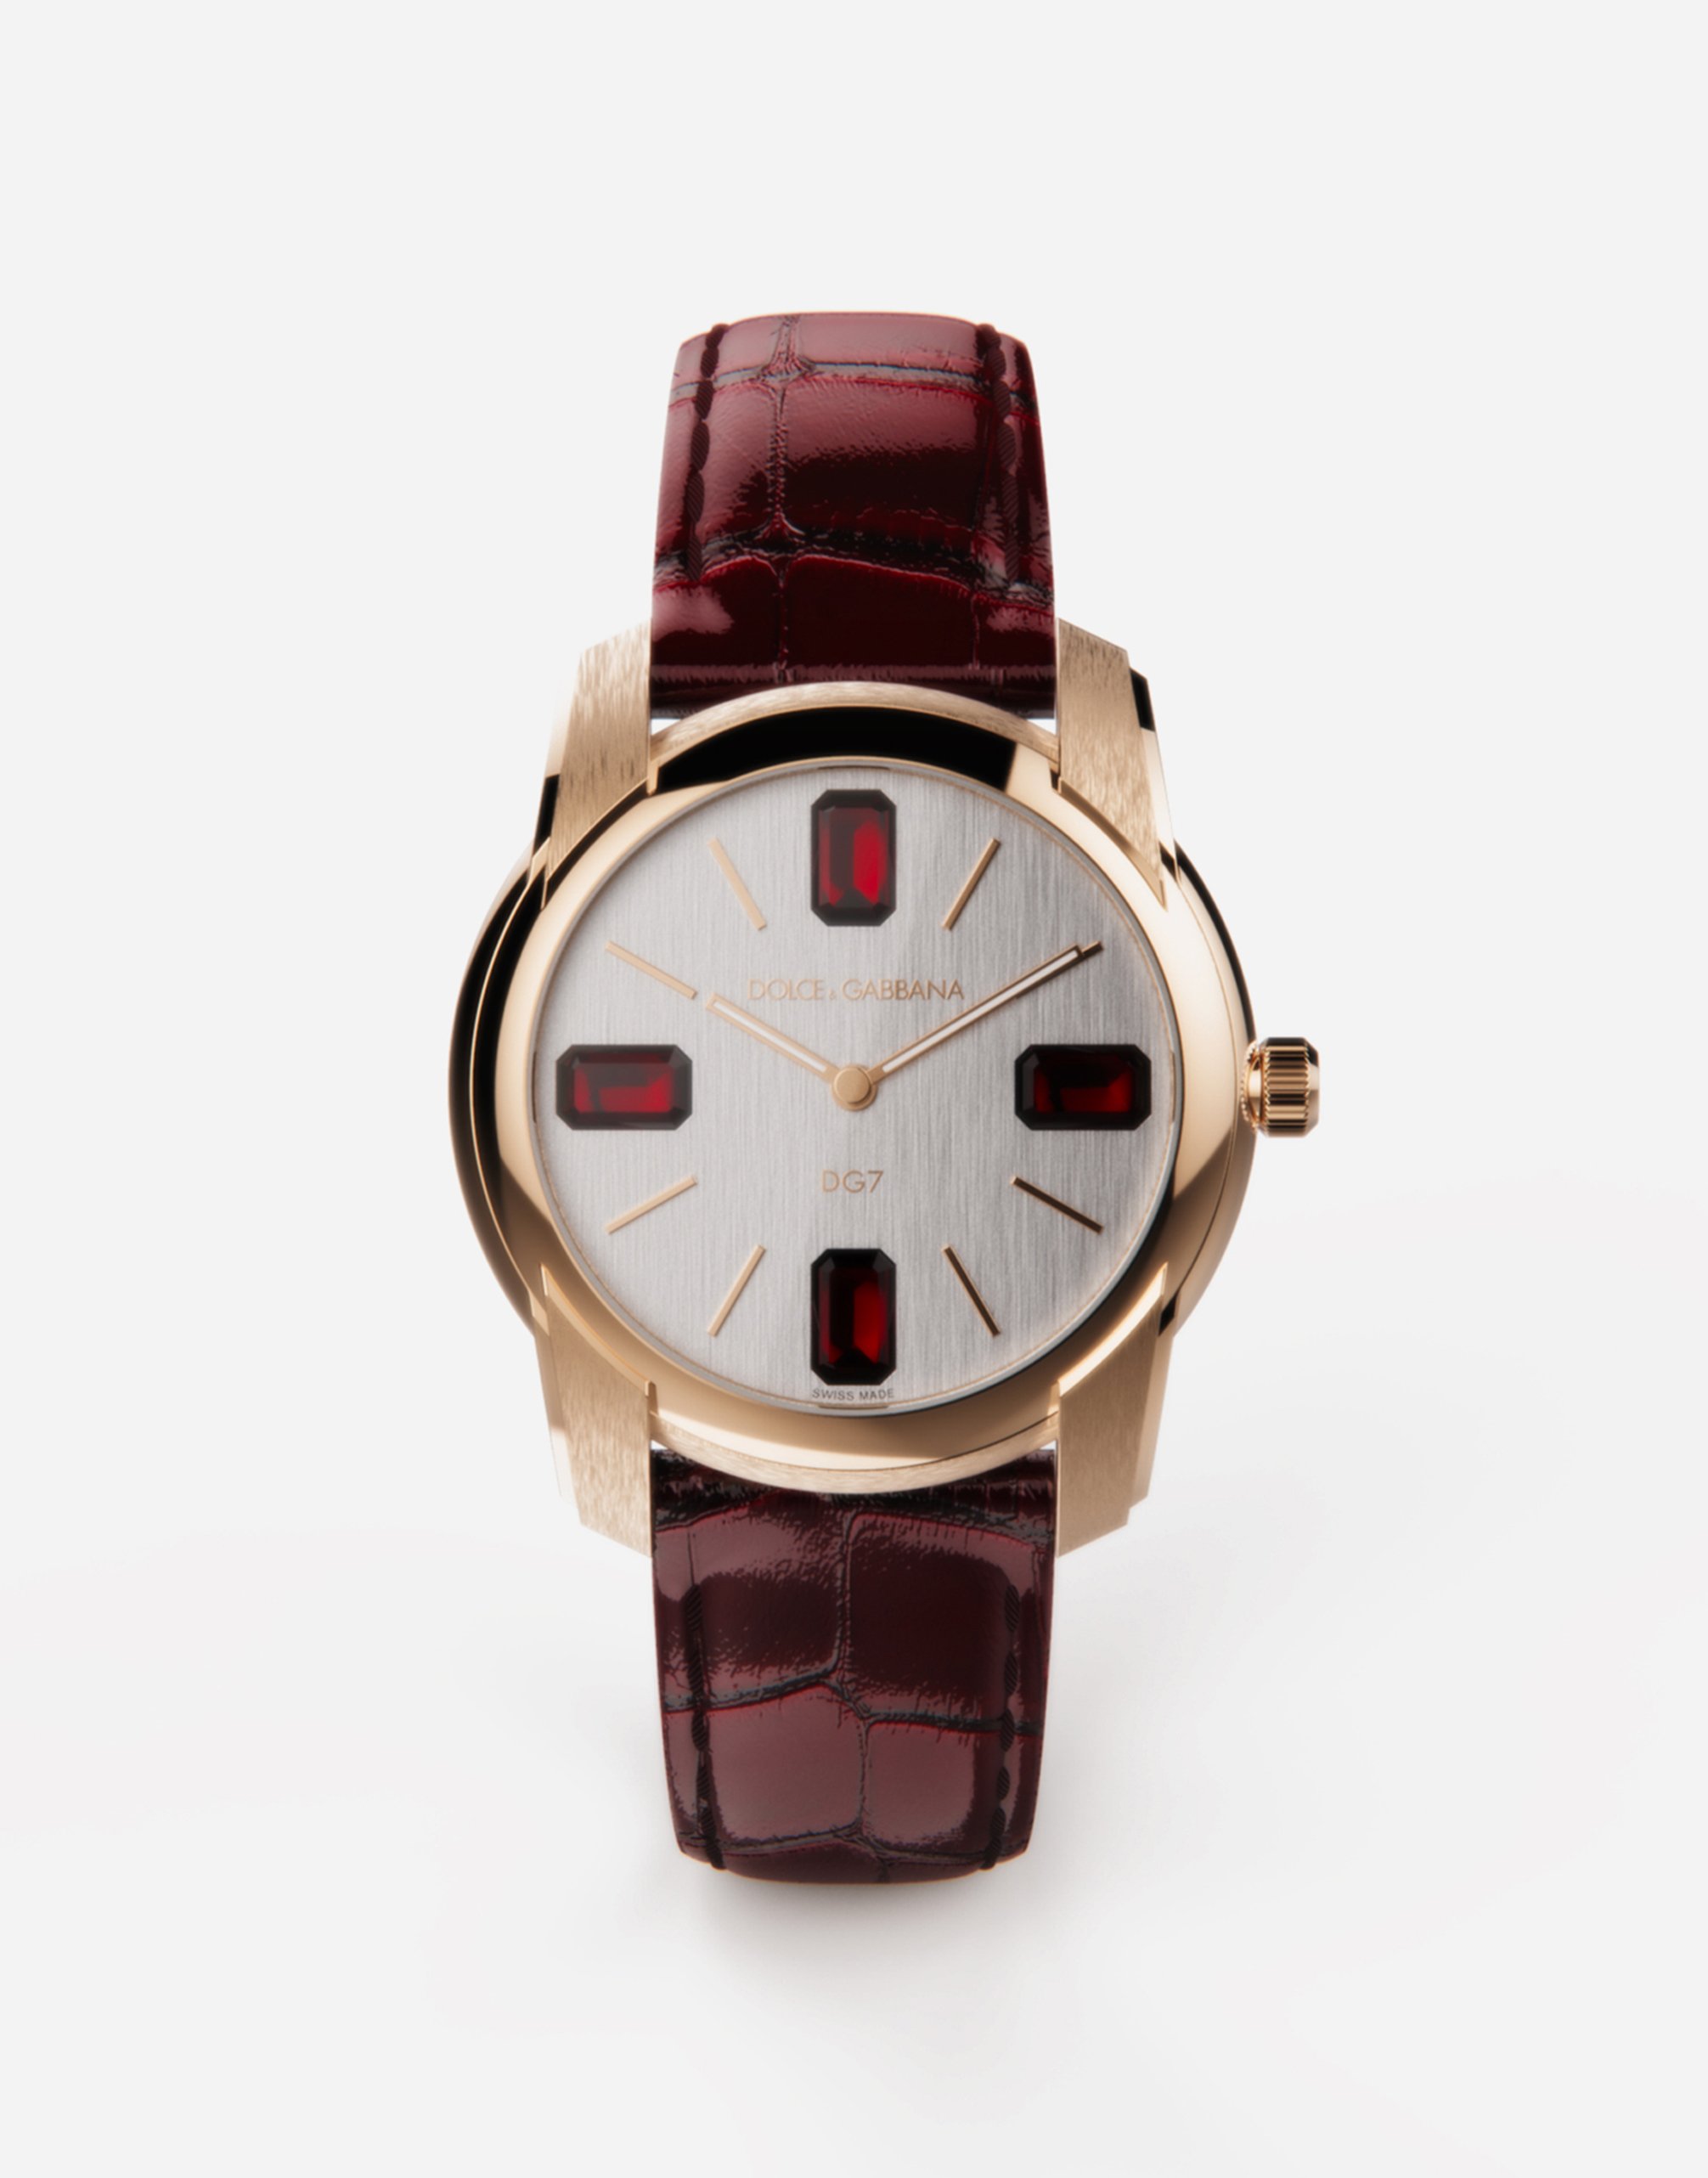 Dolce & Gabbana Gold Watch With Rubies In Burgundy